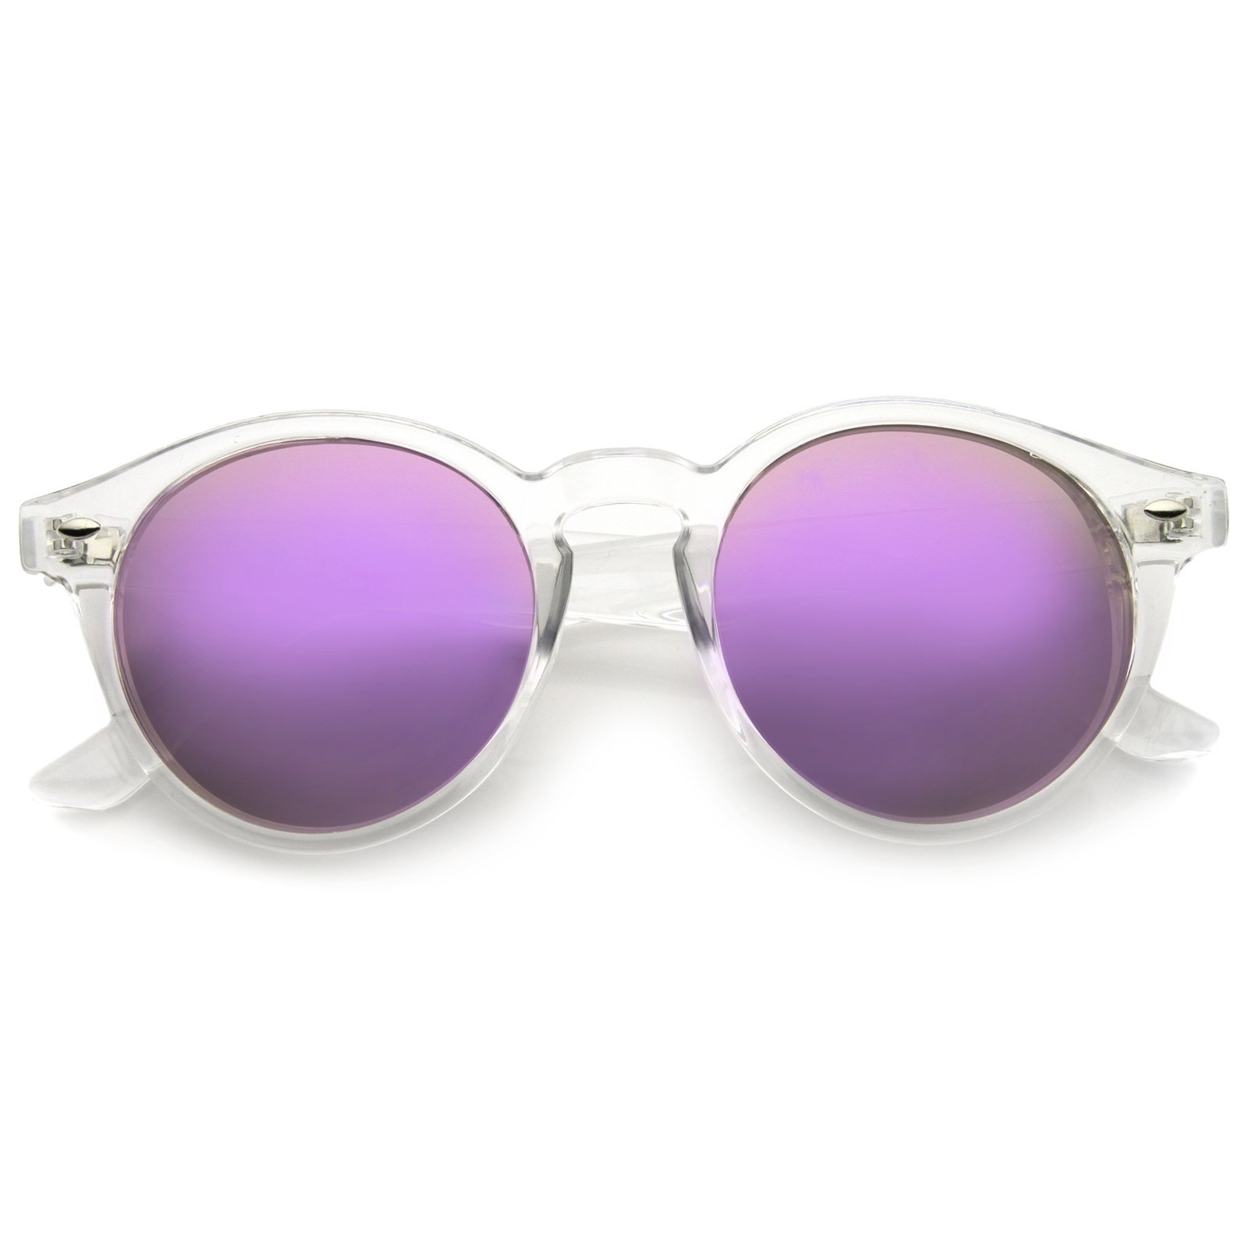 Retro Translucent Frame Color Mirror Lens Round Horn Rimmed Sunglasses 50mm - Clear / Gold Mirror